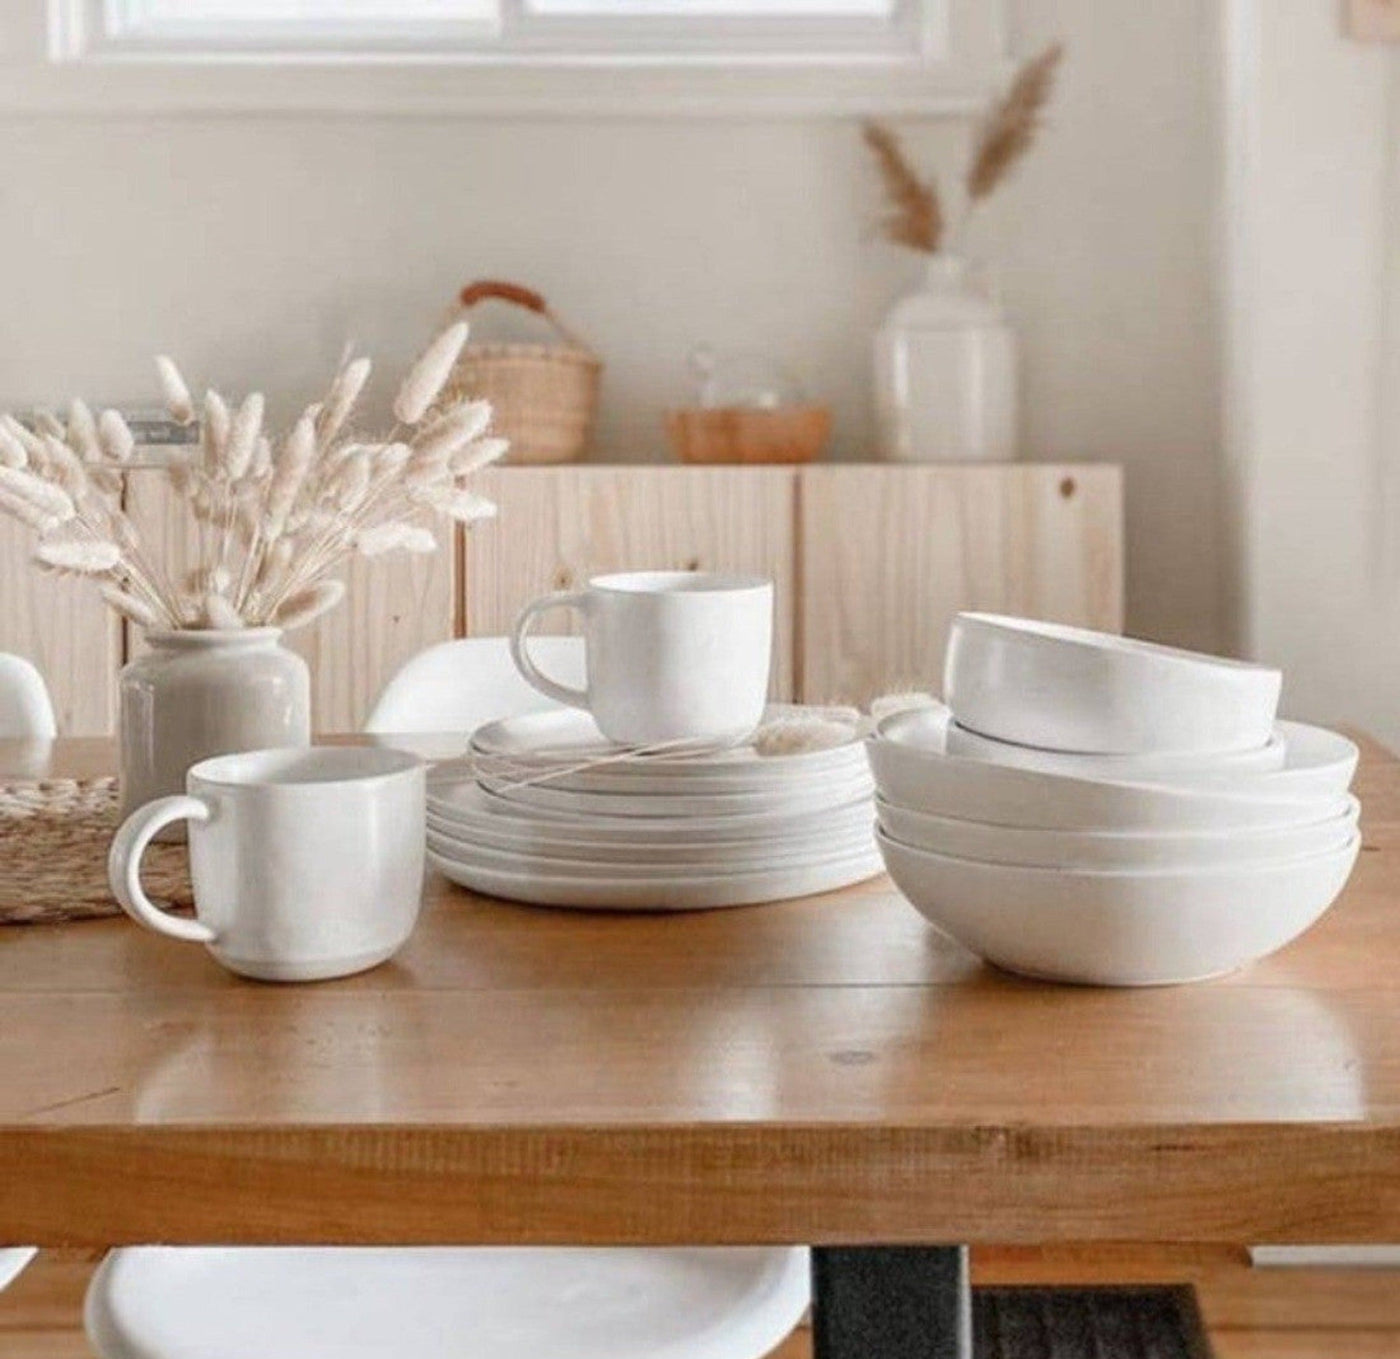 Fable dinnerware on table. Speckled white bowls, plates, and mugs.